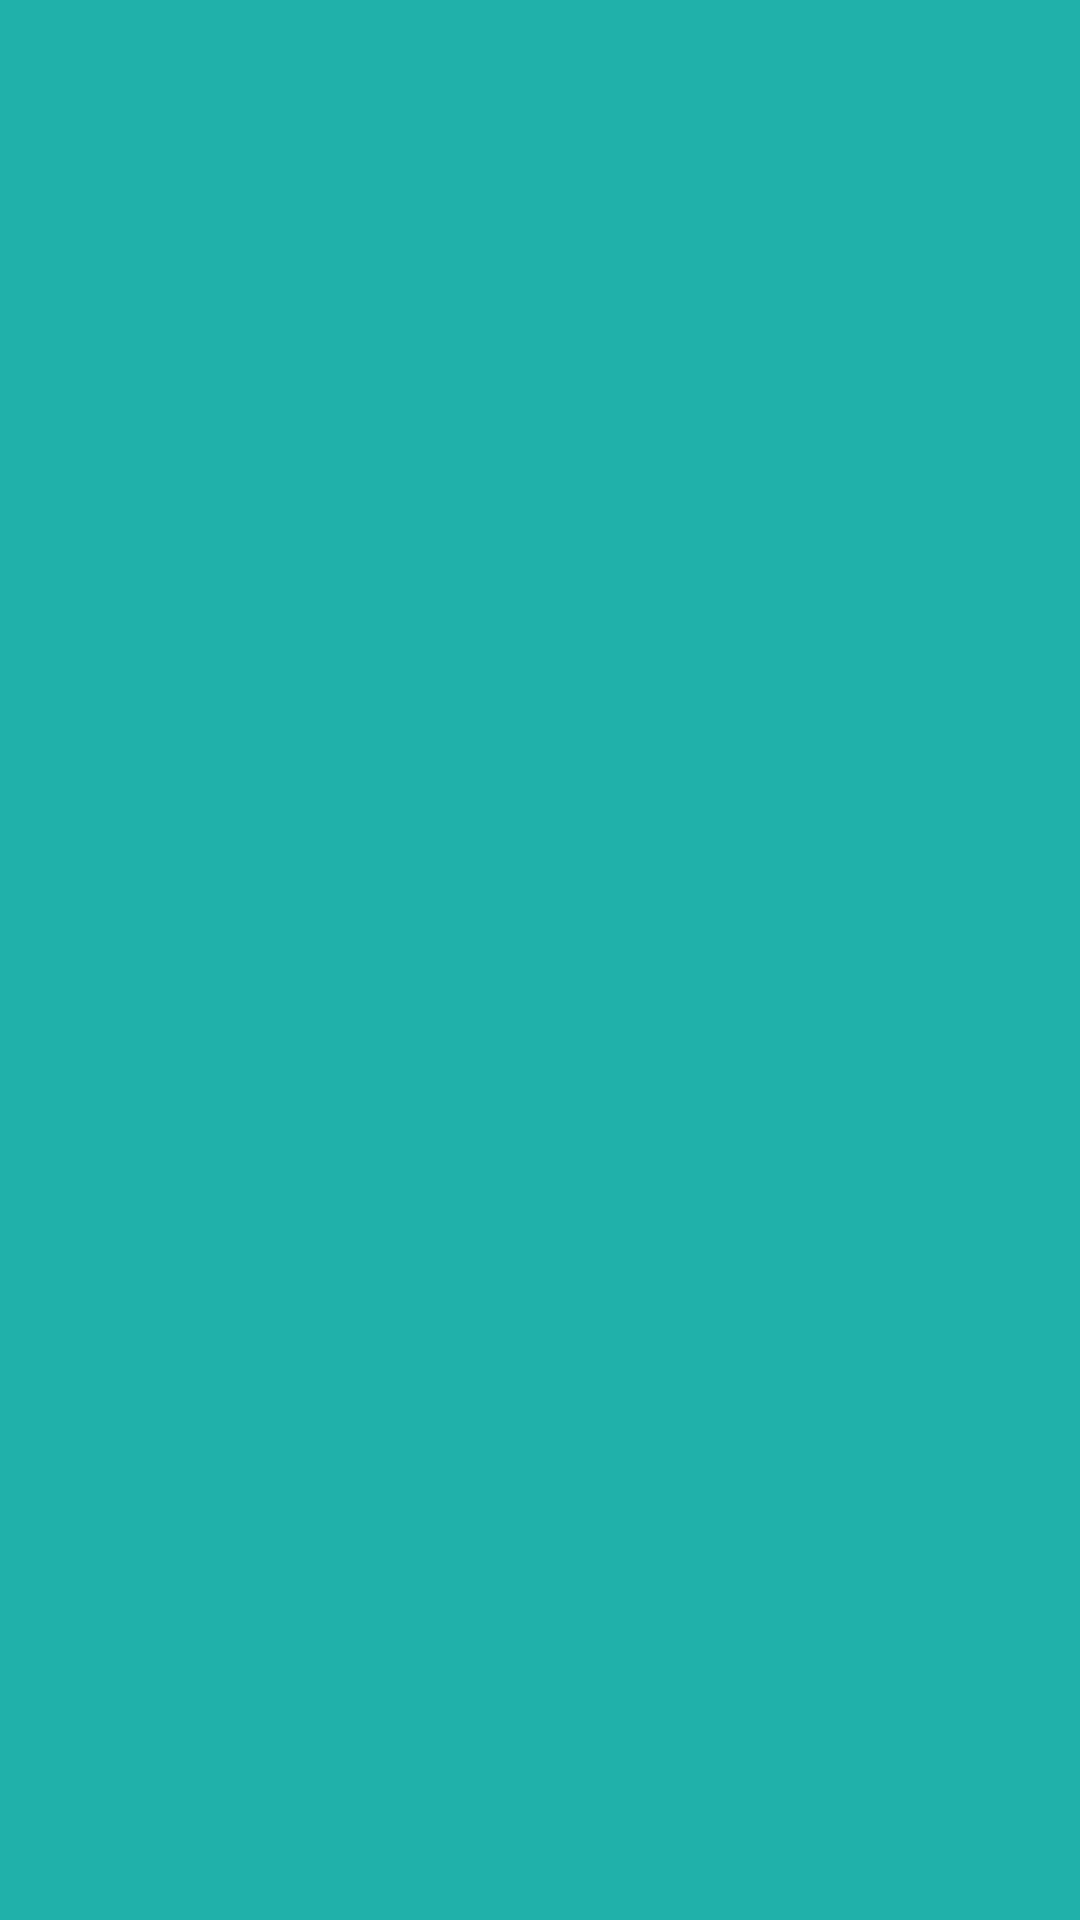 1080x1920 Light Sea Green Solid Color Background